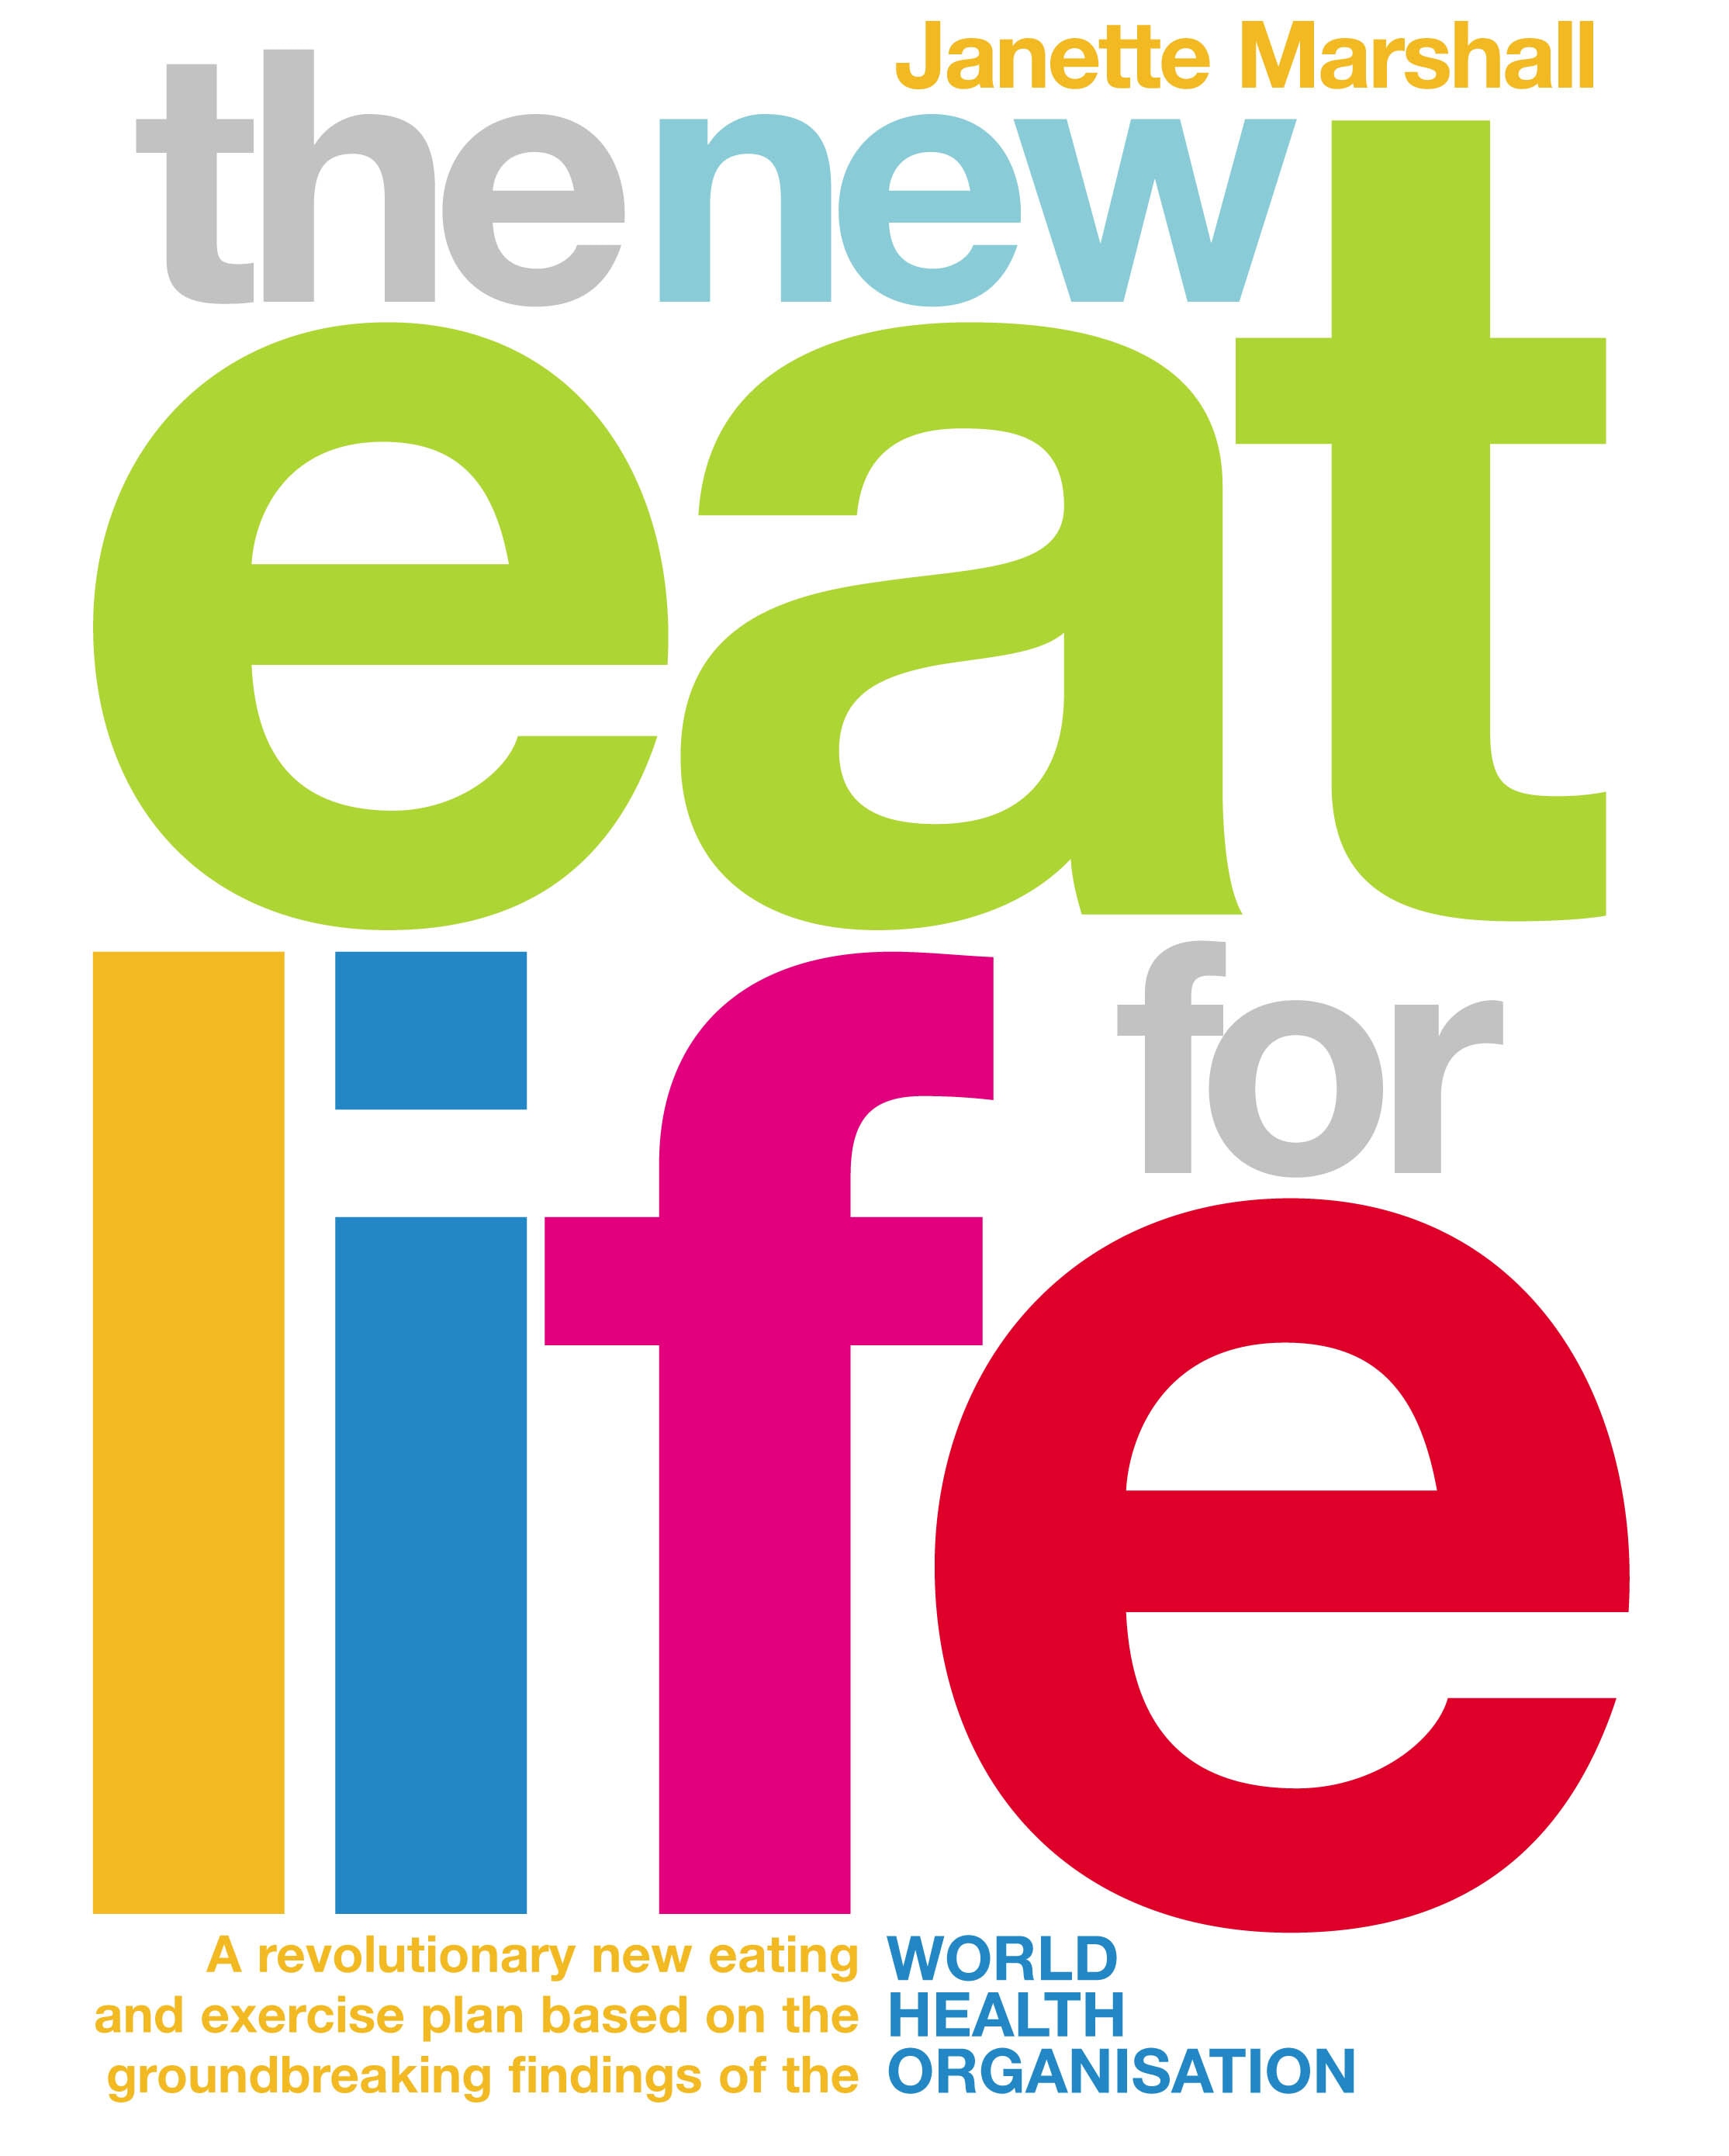 Book “The New Eat For Life” by Janette Marshall — August 1, 2019